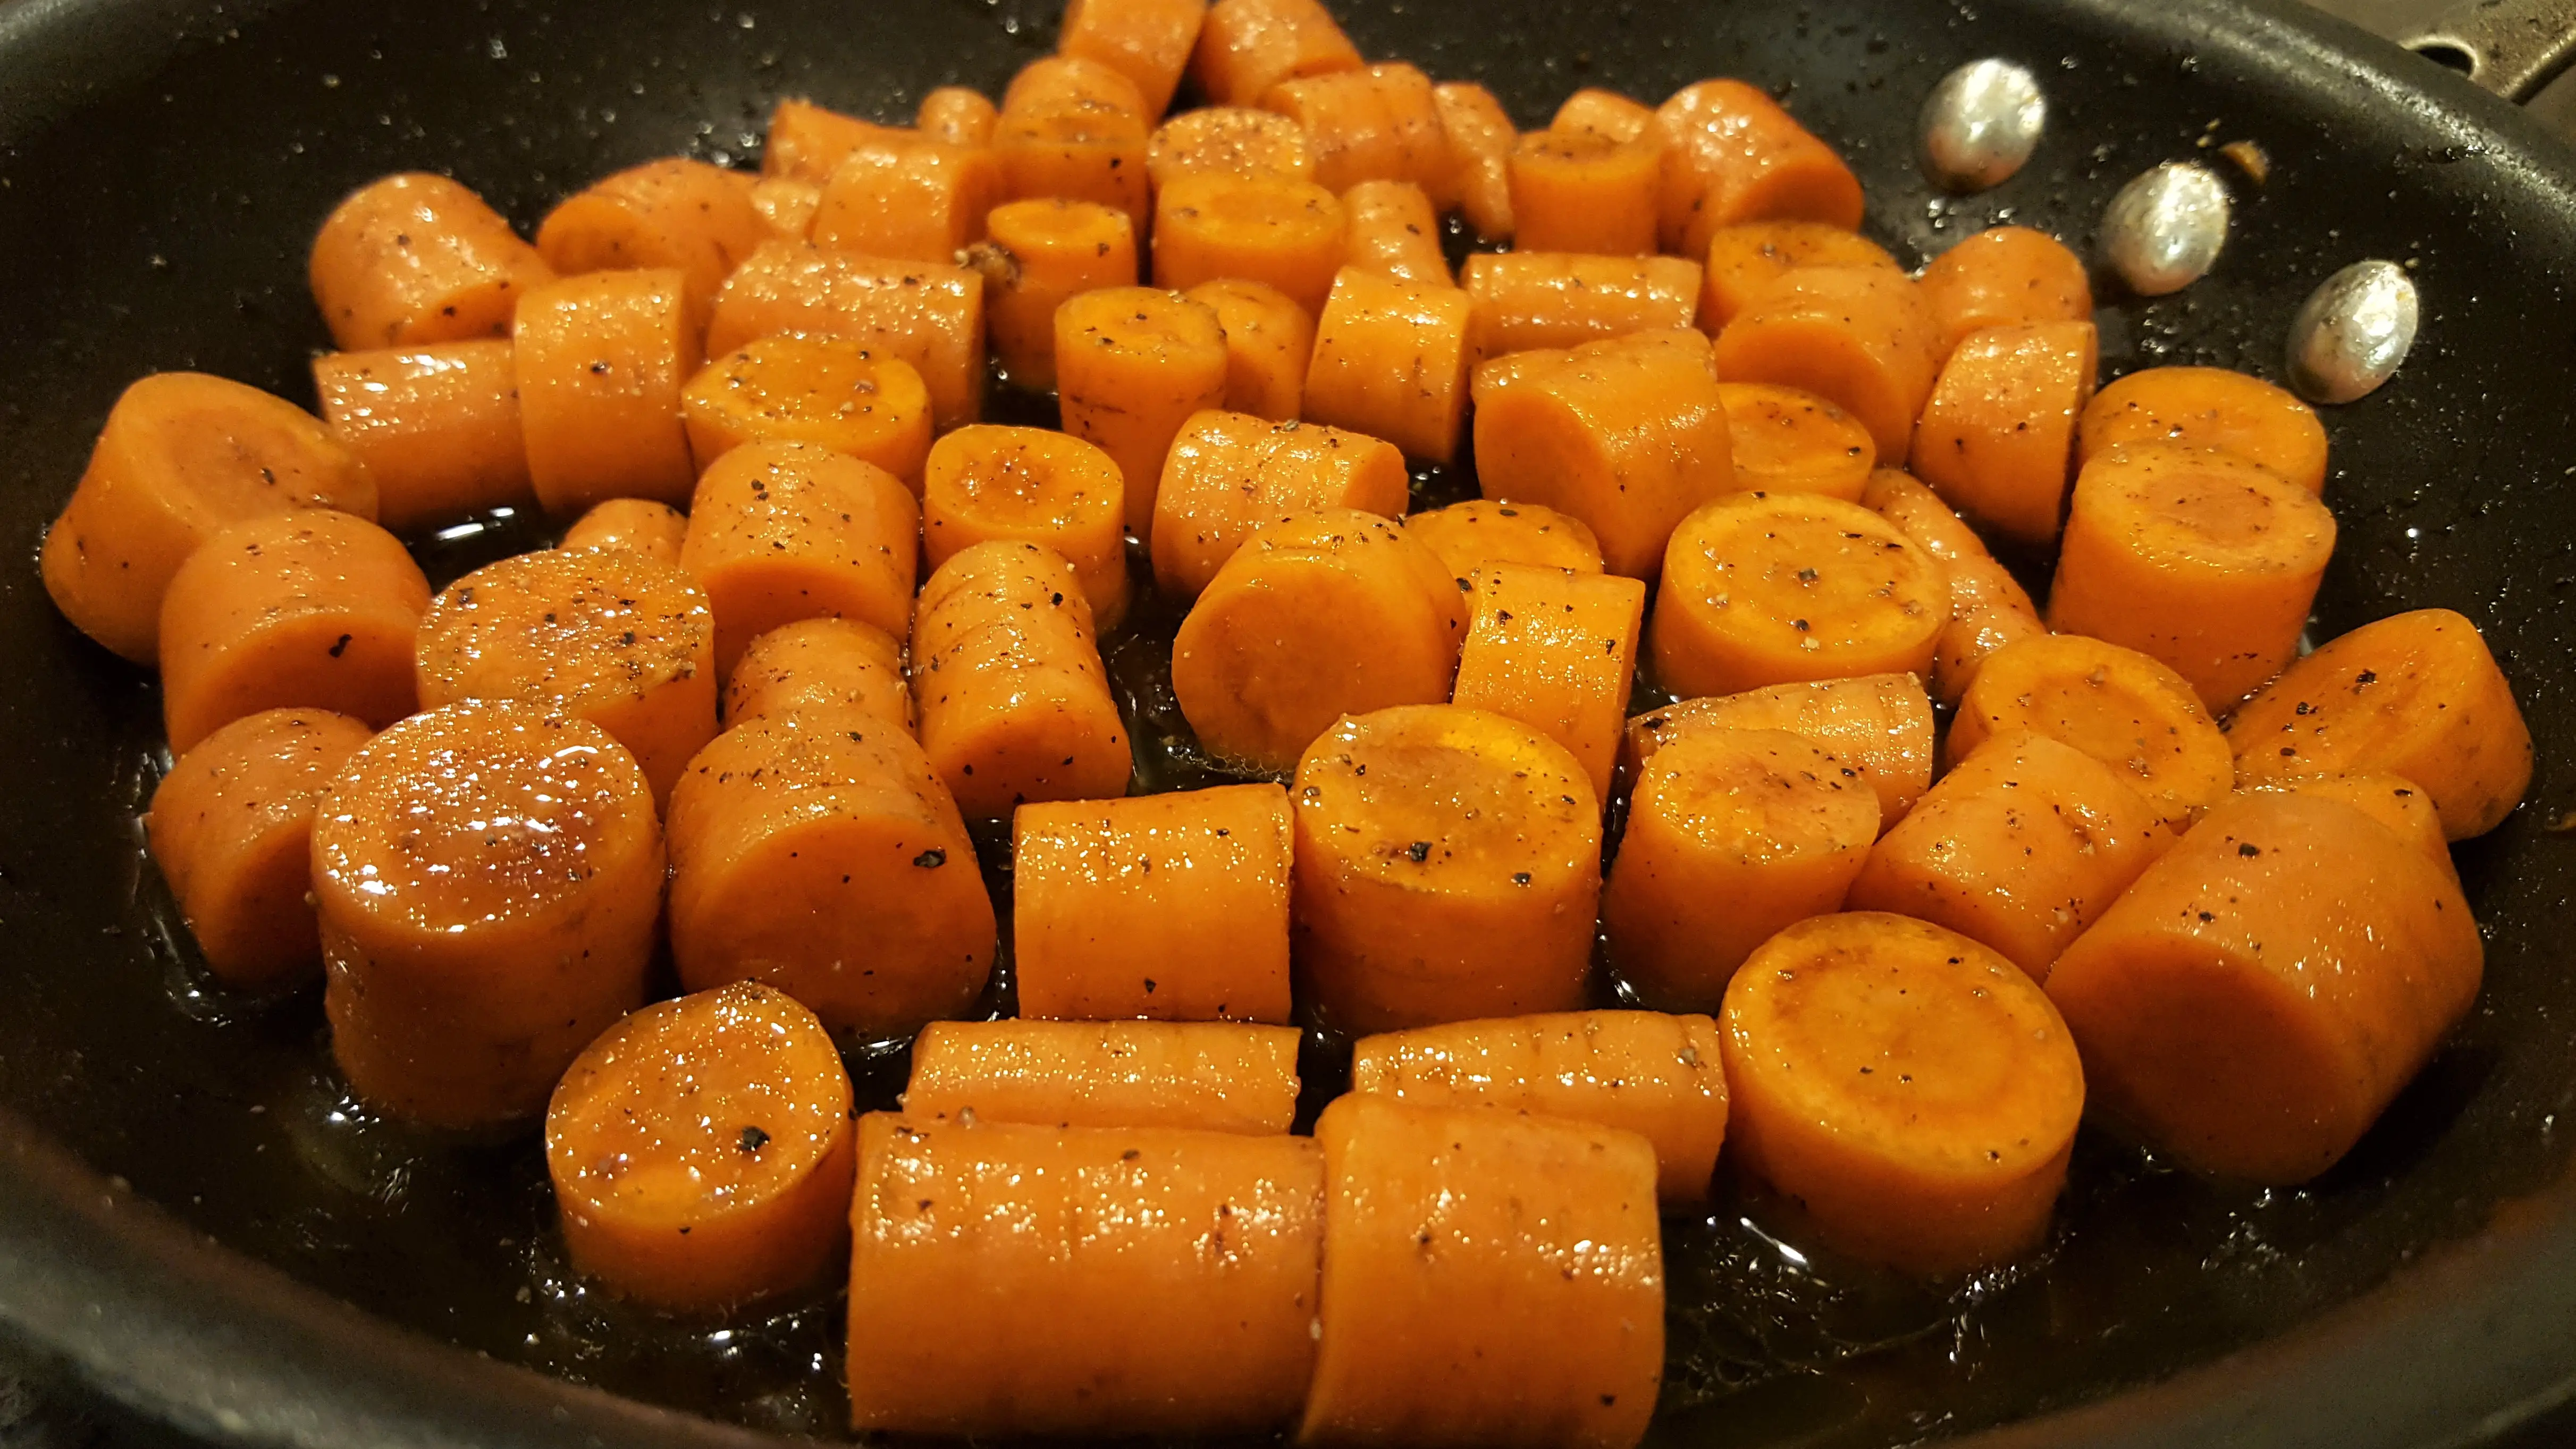 Carrots marinated in Balsamic Vinegar and ready to be roasted - Dining in with Danielle